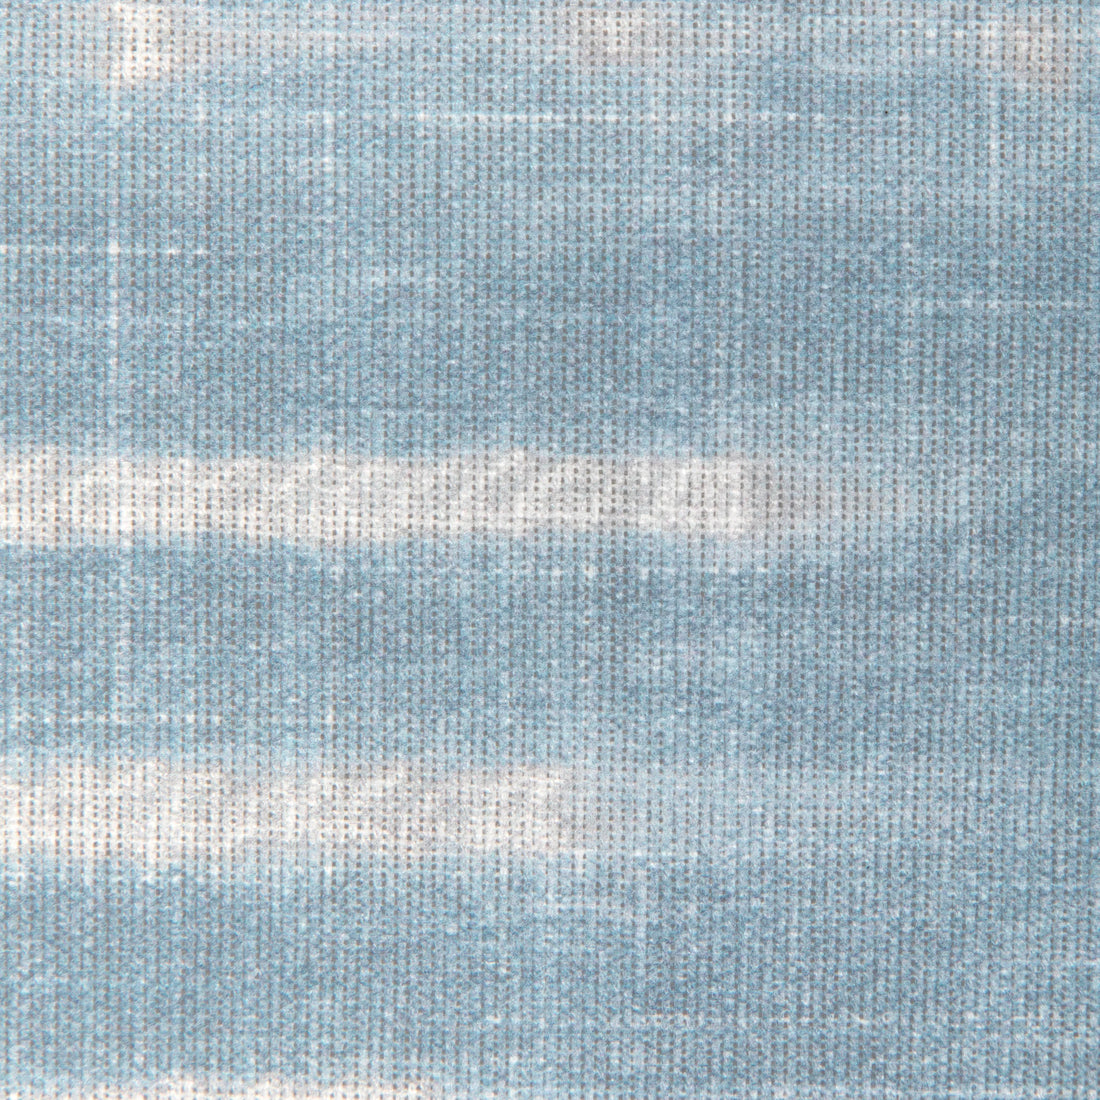 Closeup detail view of Lattimer fabric in sky color - pattern LATTIMER.15.0 - by Kravet Couture in the Riviera collection